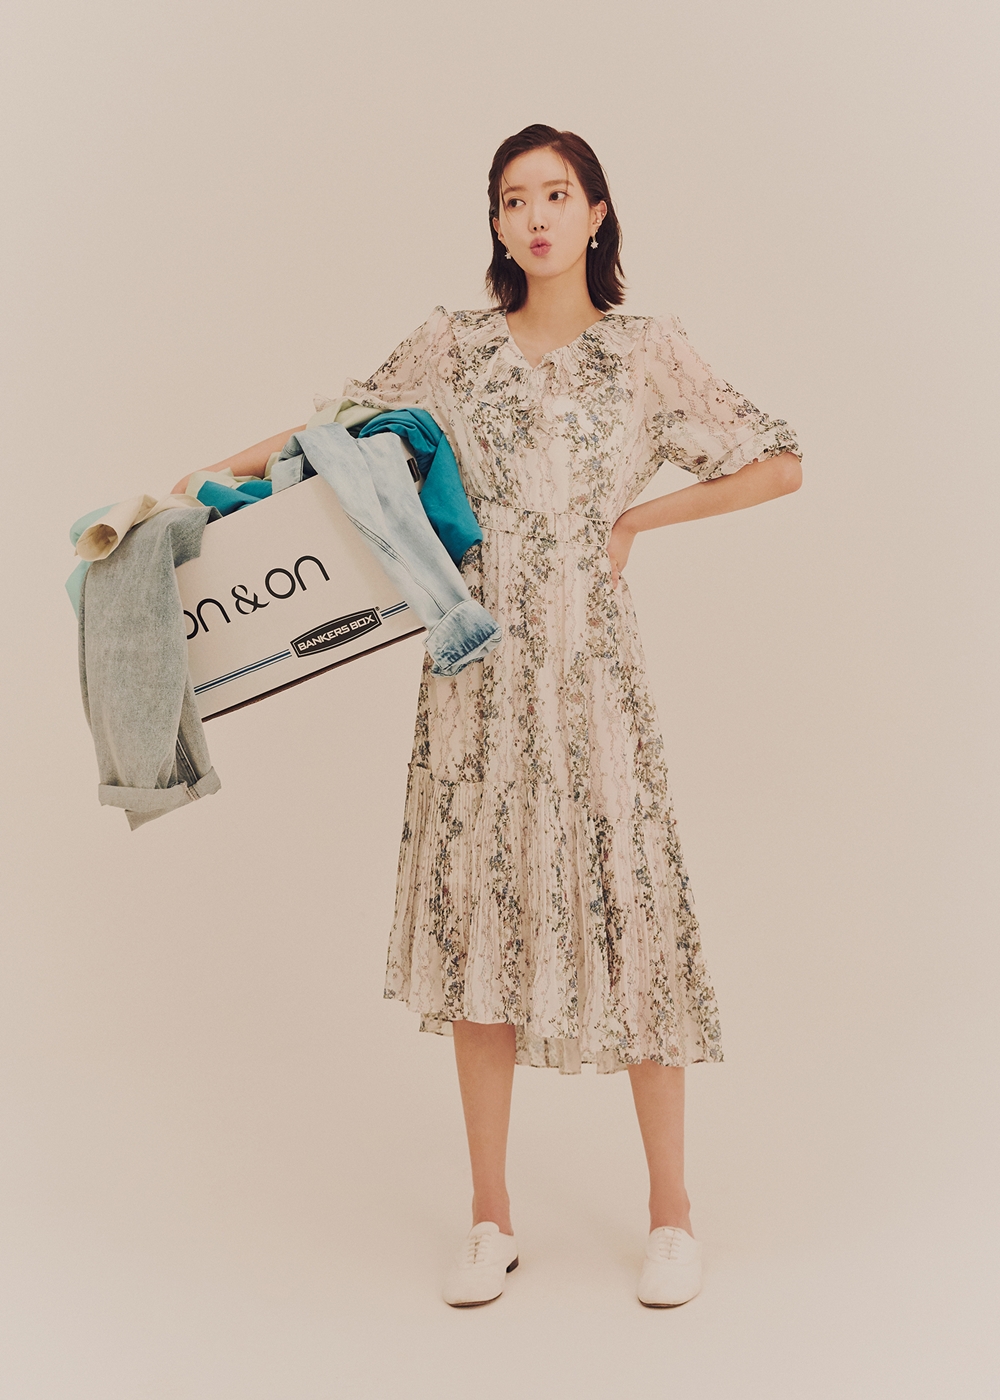 Actor Im Soo-hyang has presented a variety of lovely spring fashions.Recently, the womens wear brand On & On (ON & ON) released a 20SS project pictorial Sunday (SUNDAY) p.m. 3:15 with Im Soo-hyang.This photo is based on Sunday afternoon, when 2030 women do a lot of personal things that they have delayed on weekdays. I borrowed keywords from Im Soo-hyangs routine.Im Soo-hyang in the public picture showed a pure charm wearing a neat white roper in a subtle floral pattern One Piece.In another pictorial, Im Soo-hyang created a girly look by matching socks and sandals to a creamy long one piece with a rich puff and wide collar.Im Soo-hyang also produced a casual mood by matching vintage Denim pants to a blouse with a variety of eyelet points.On the other hand, On & Ons 20SS items worn by Im Soo-hyang in the picture will be released sequentially, and can be found at the official online store Roundge B and the department store on and on store nationwide.